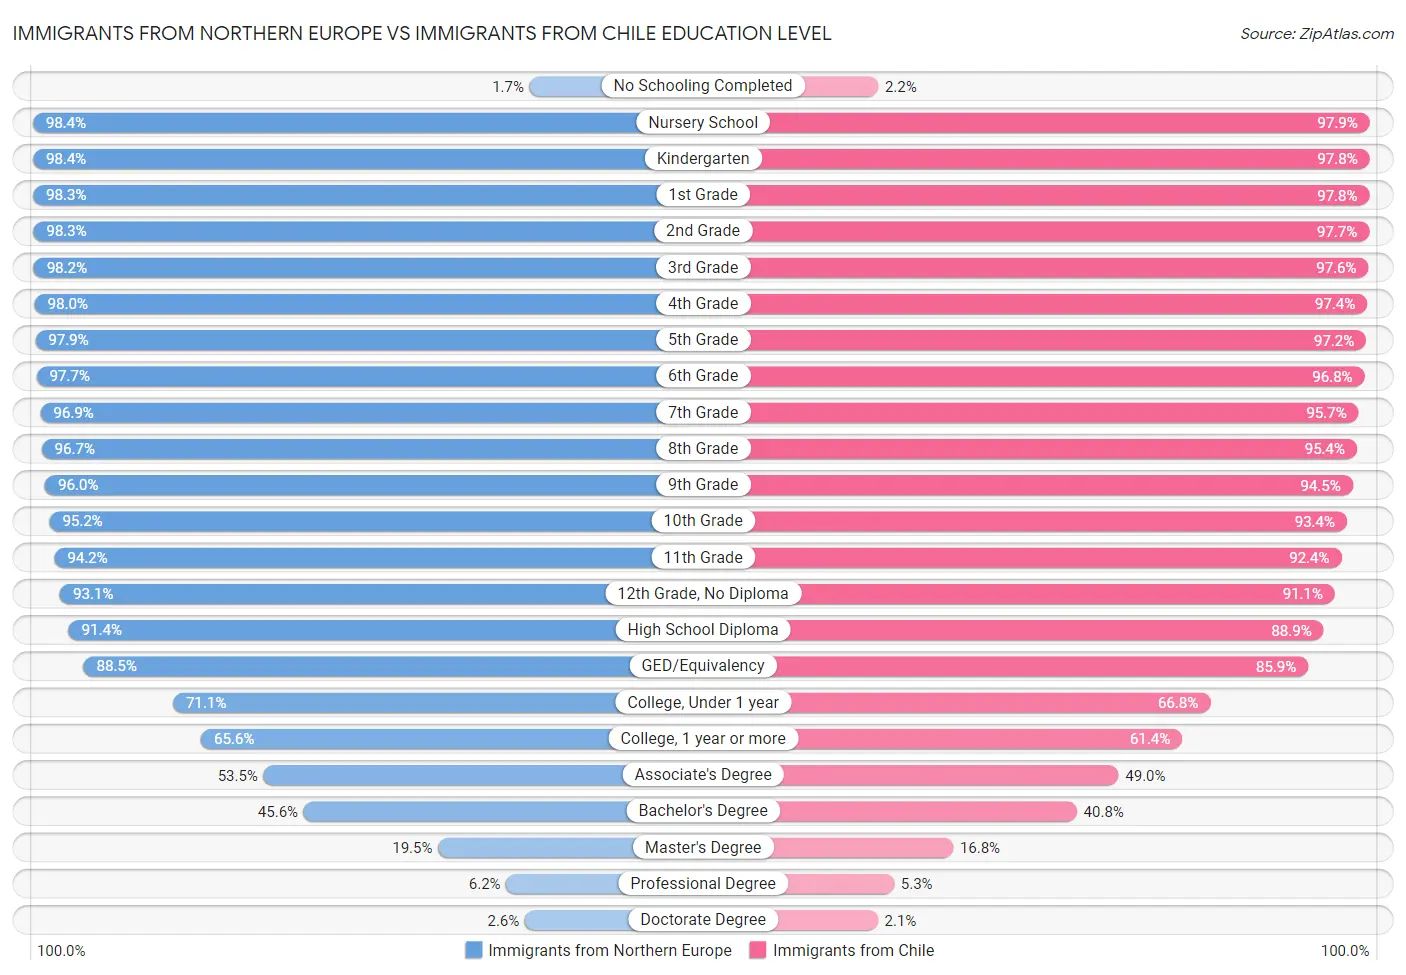 Immigrants from Northern Europe vs Immigrants from Chile Education Level